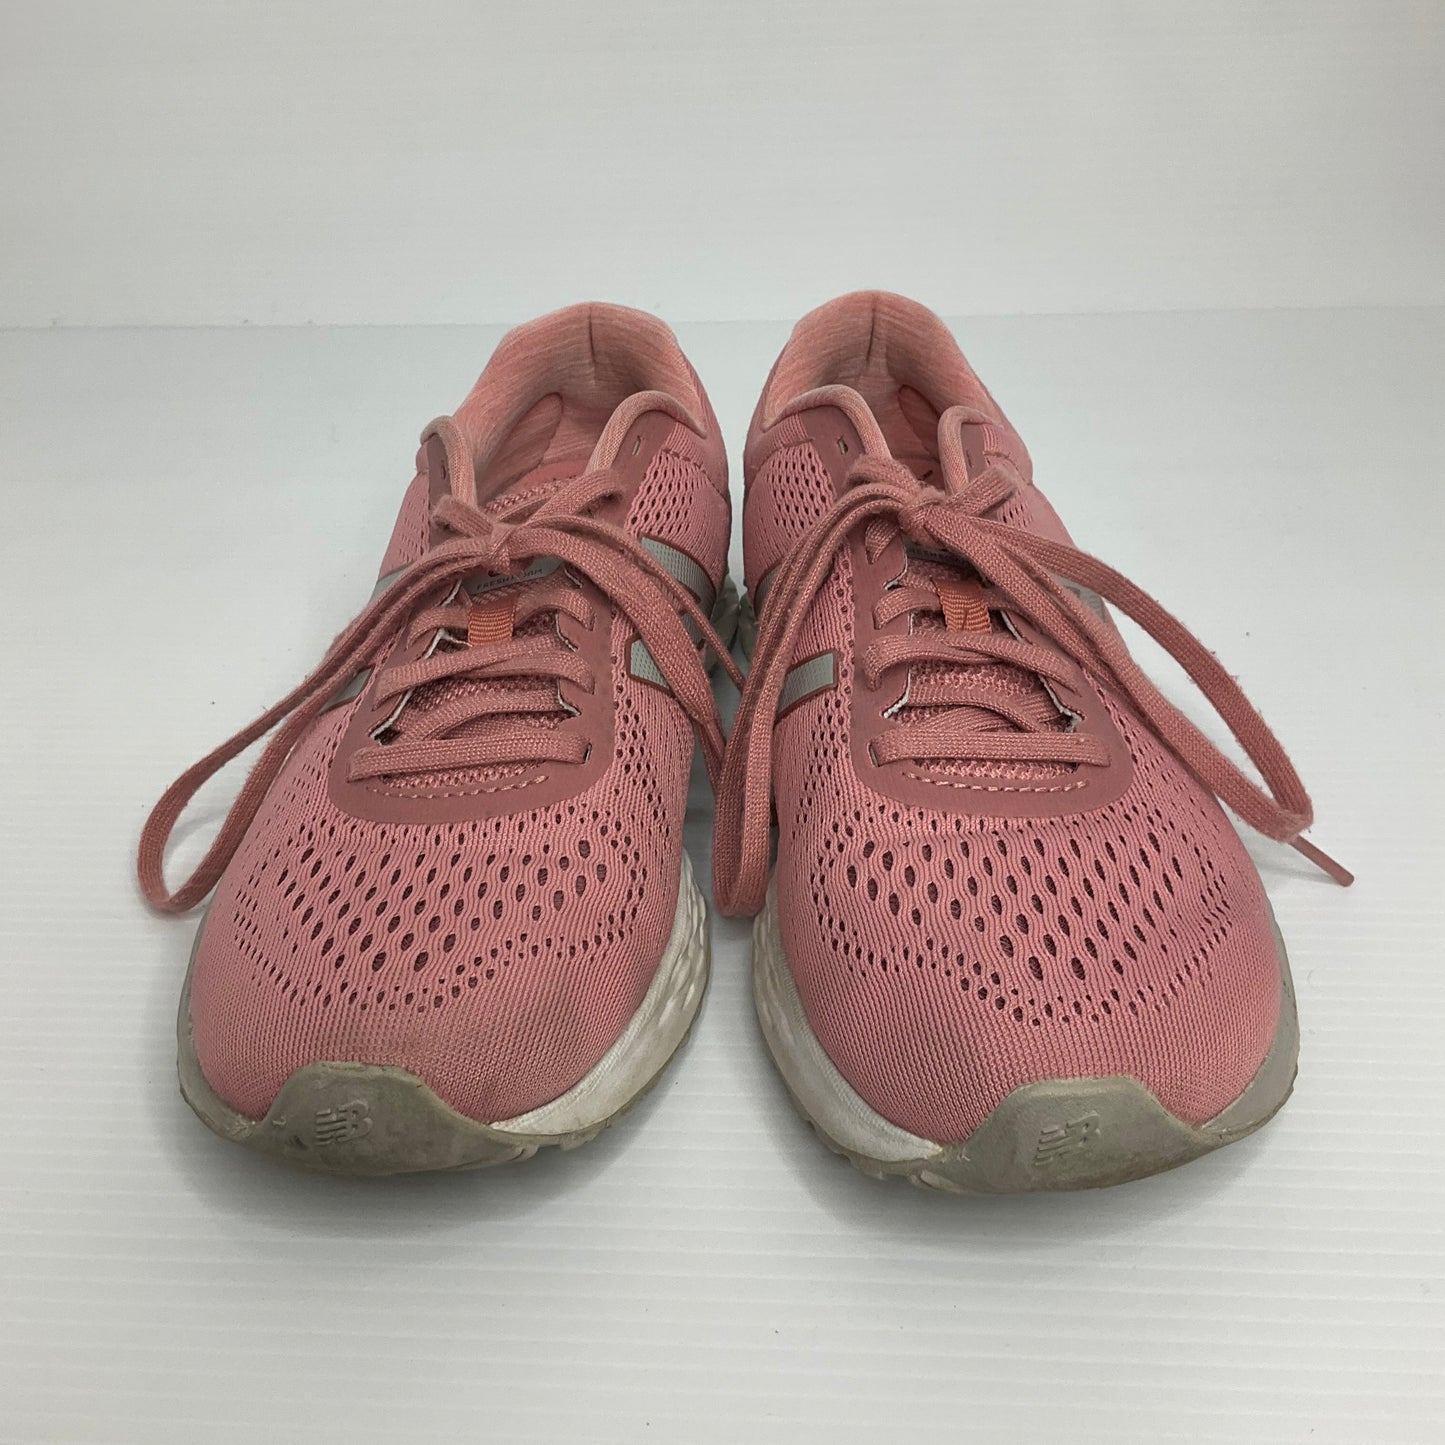 Pink Shoes Athletic New Balance, Size 7.5